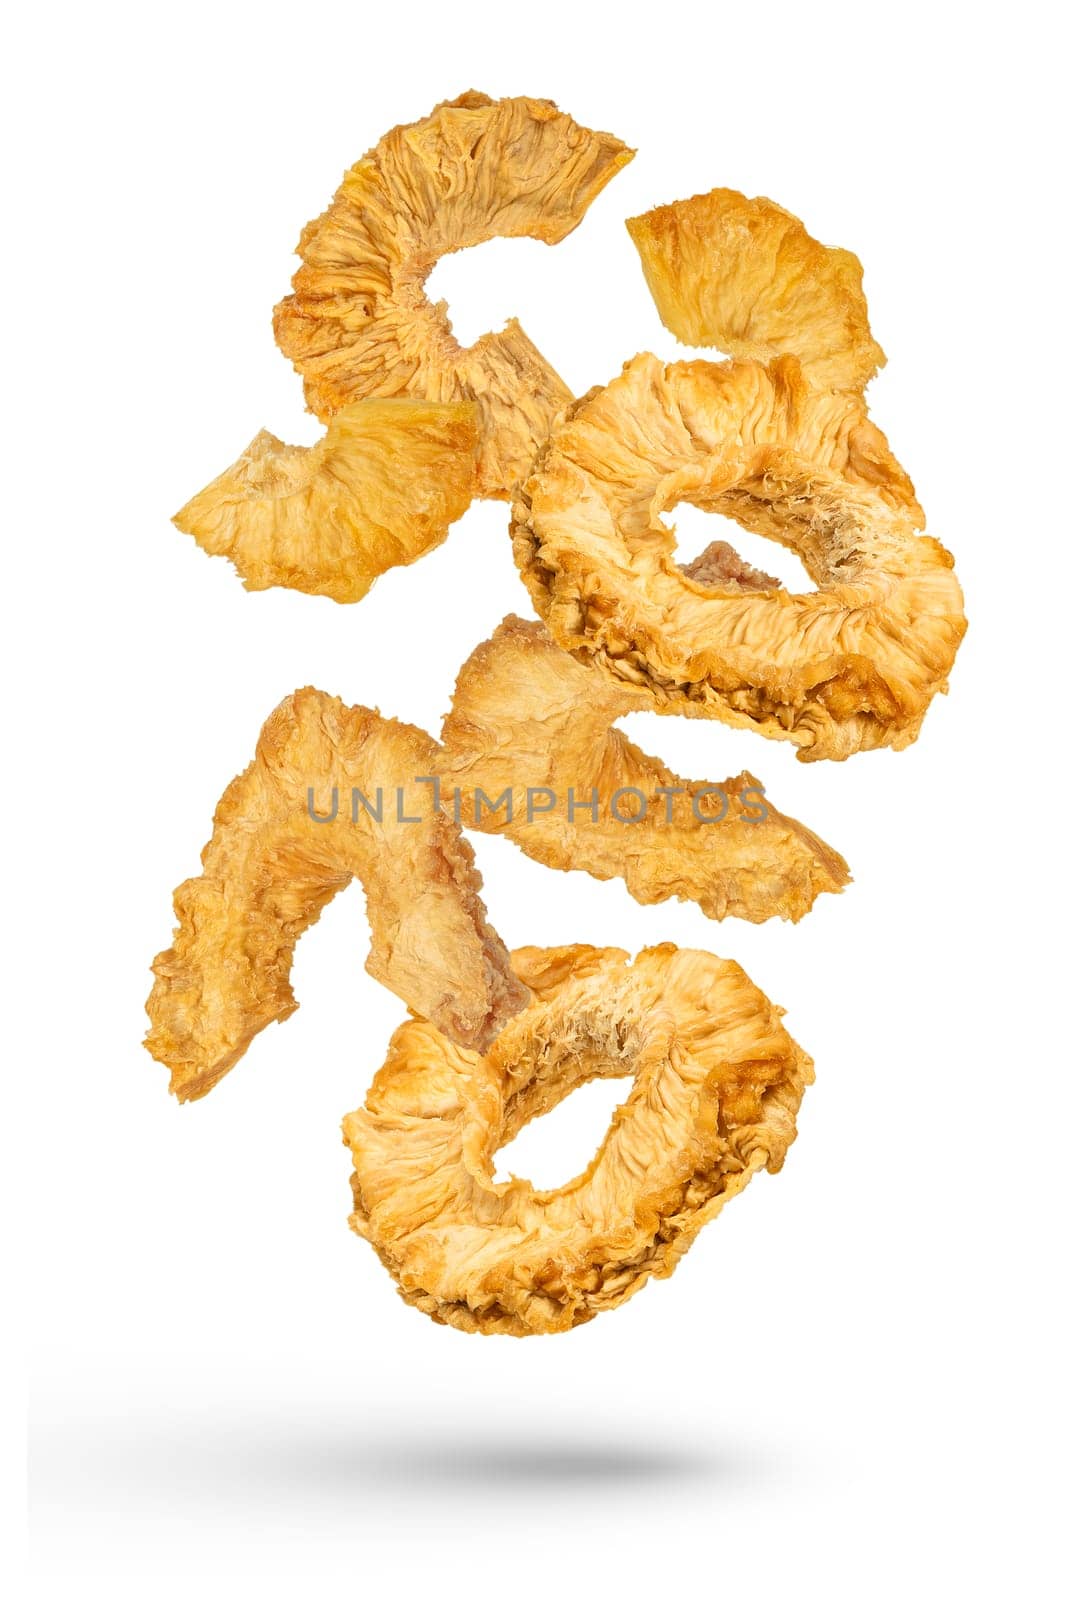 Falling slices of dried pineapple on a white isolated background. Dried pineapple rings of different cuts scatter in different directions. High quality photo. by SERSOL